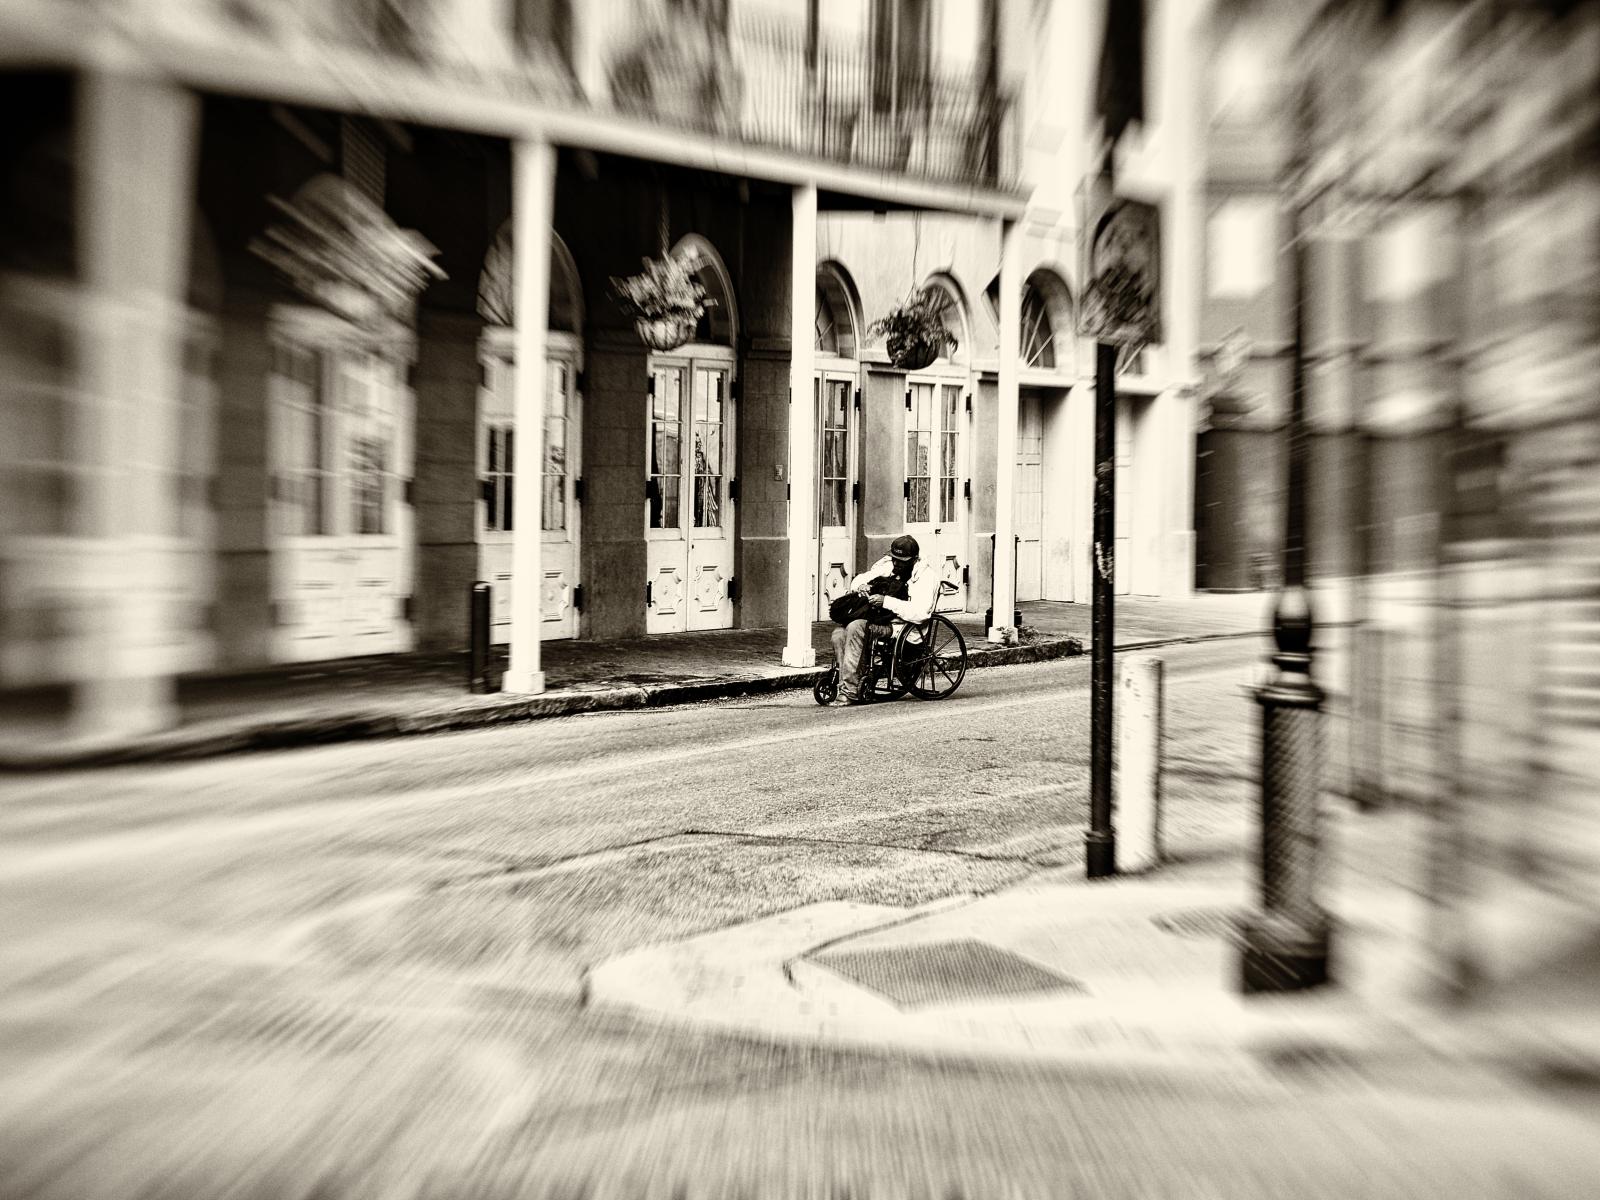 Lone homeless person in the French Quarter - Covid-19